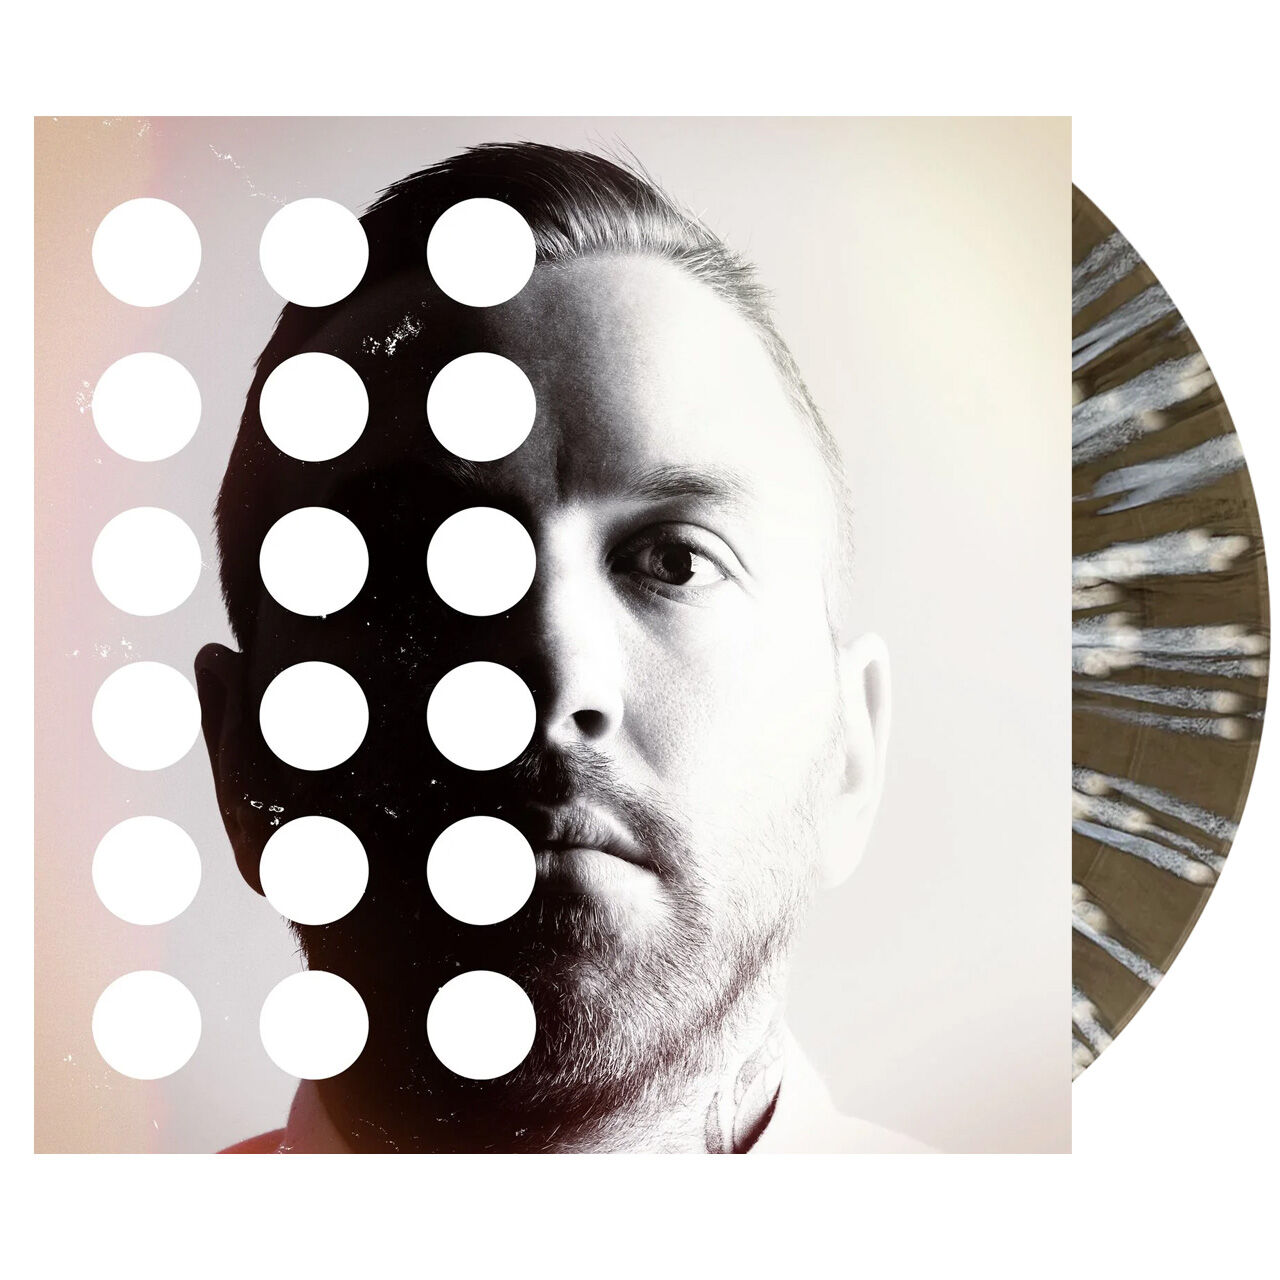 CITY AND COLOUR The Hurry And The Harm (10 Year Anniversary) White/Black Splatter 2LP Vinyl